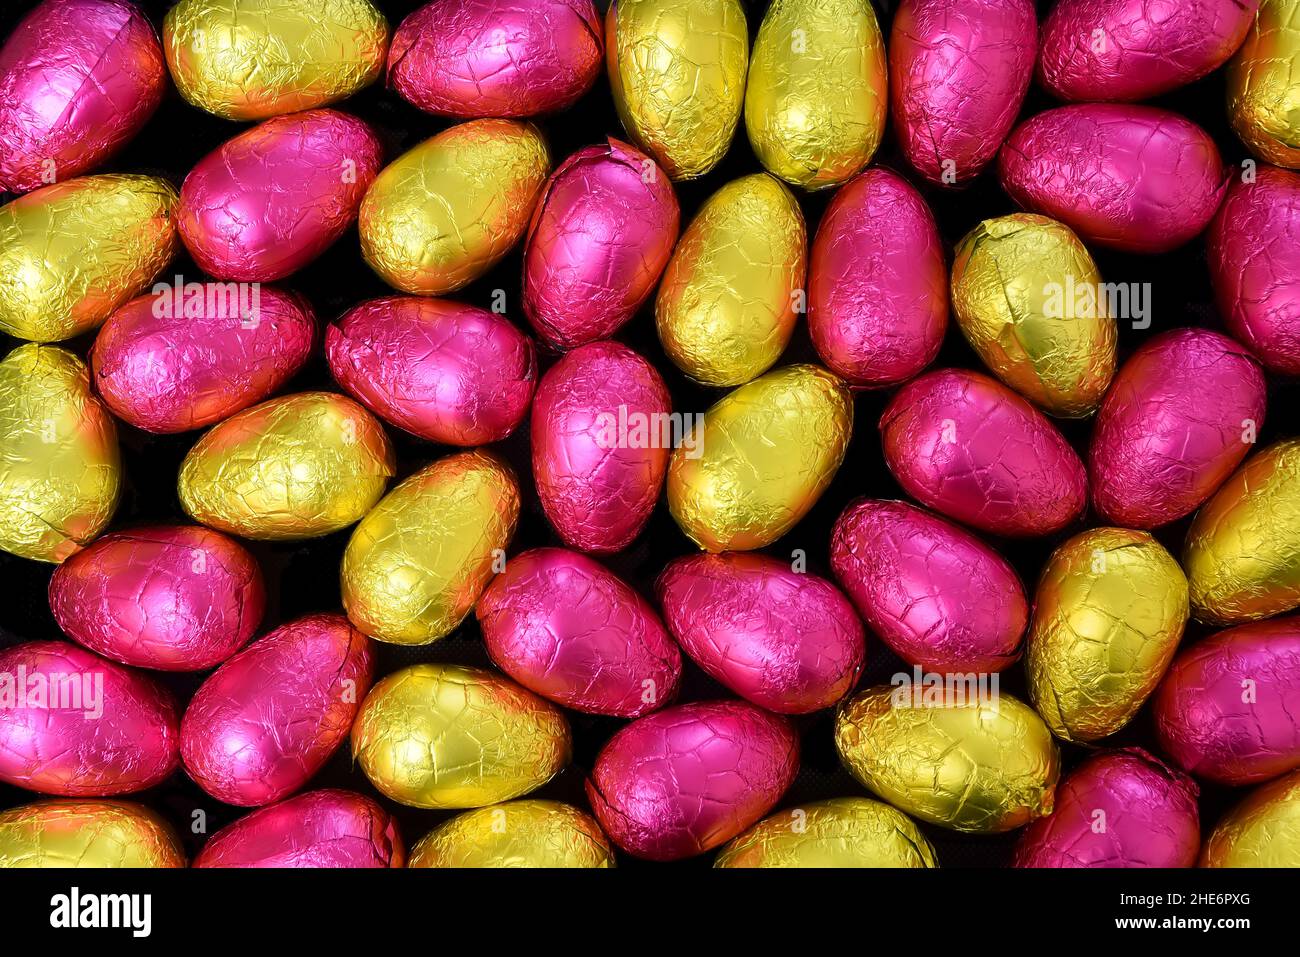 Pile or group of multi colored and different sizes of colourful foil wrapped chocolate easter eggs in yellow, gold and pink. Stock Photo